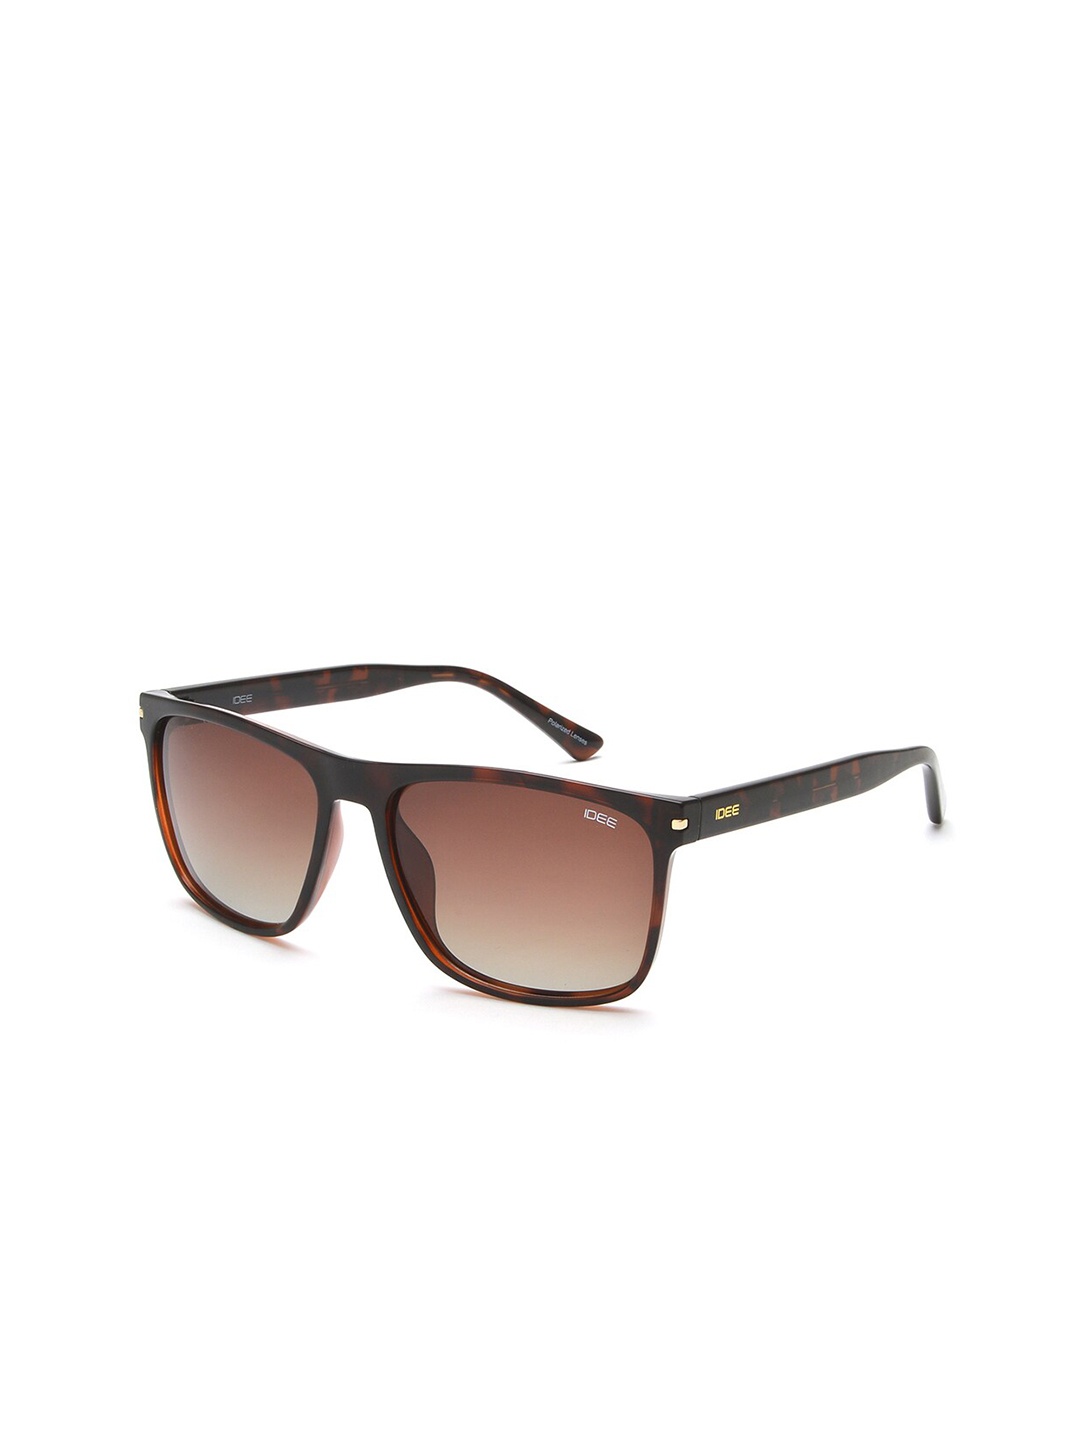 

IDEE Men Square Sunglasses with UV Protected Lens IDS2947C2PSG, Brown